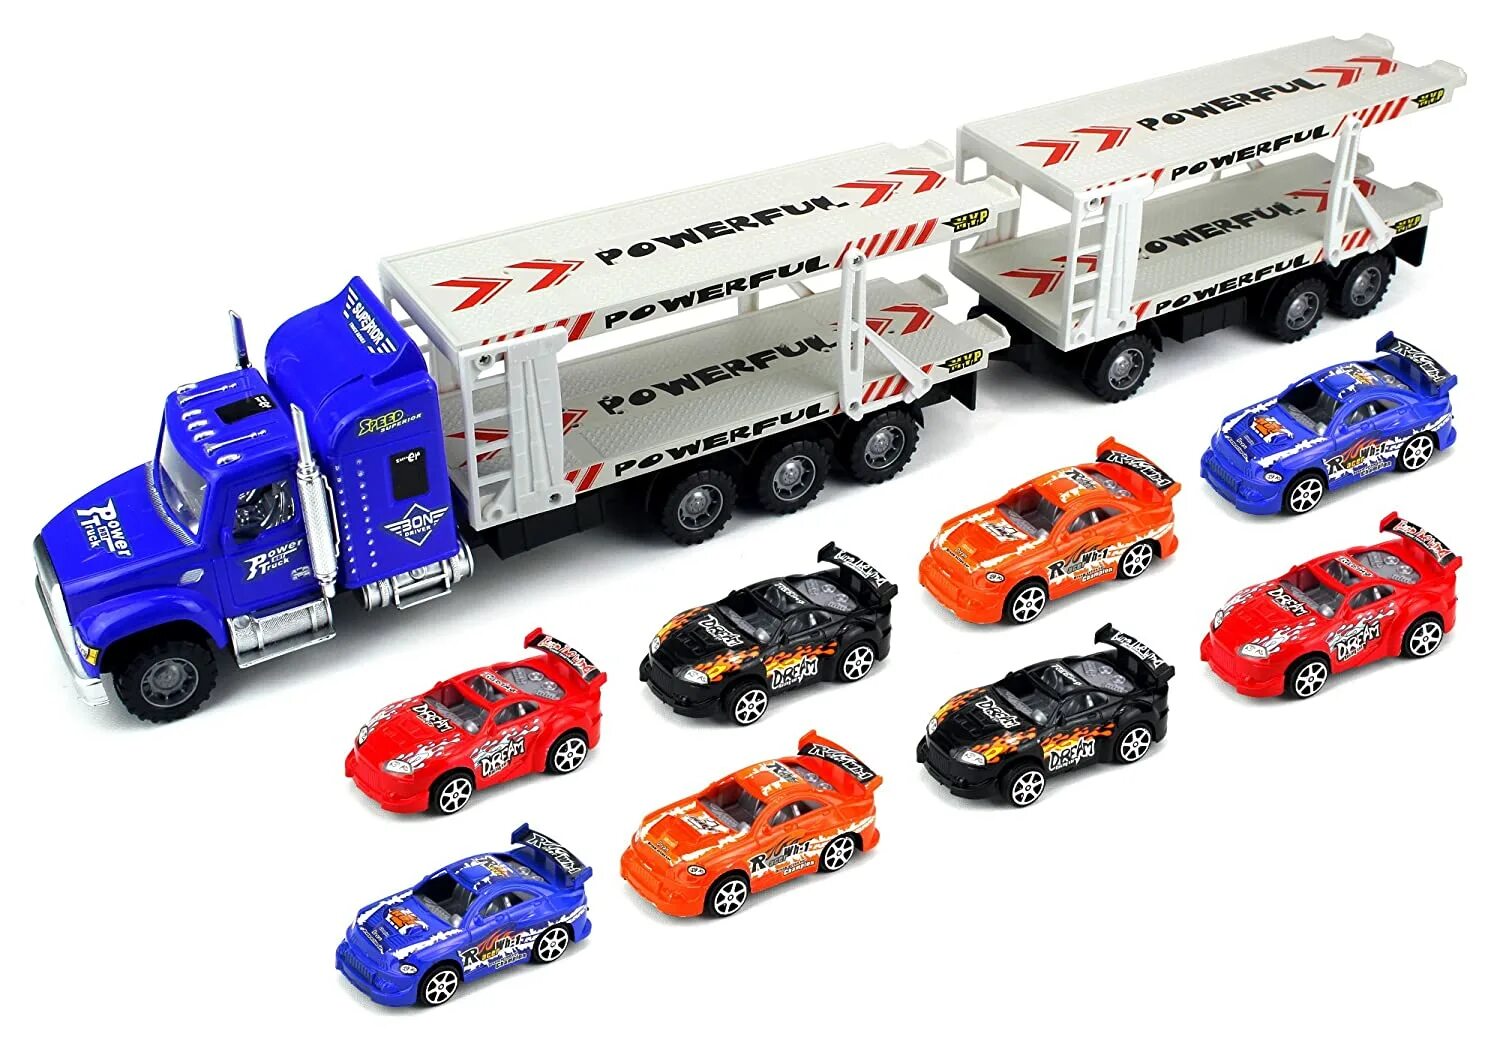 Truck toy cars. Toys Truck Transporter. Power Truck игрушки. Car Transporter Toy car. Race on Toy cars America.